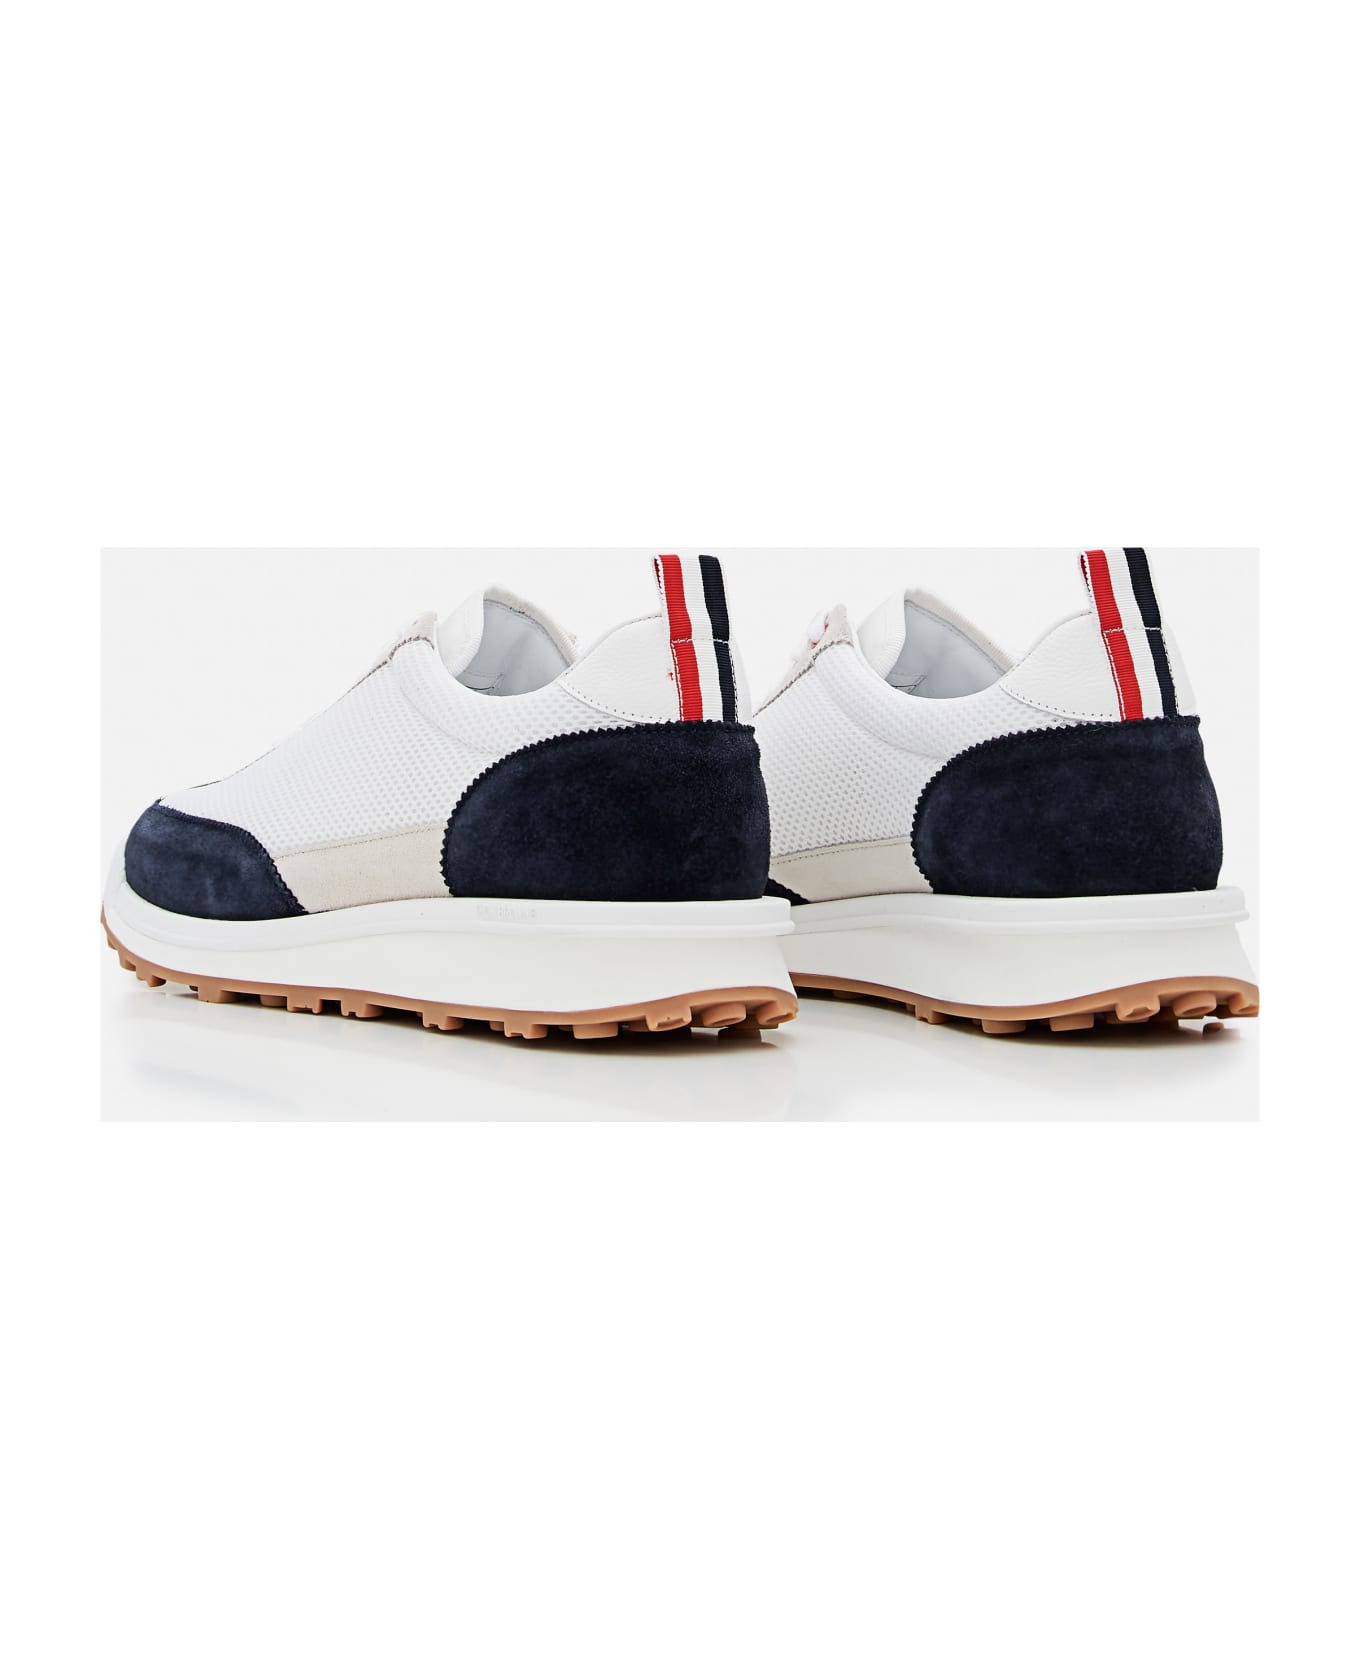 Thom Browne Tech Runner Sneakers - White